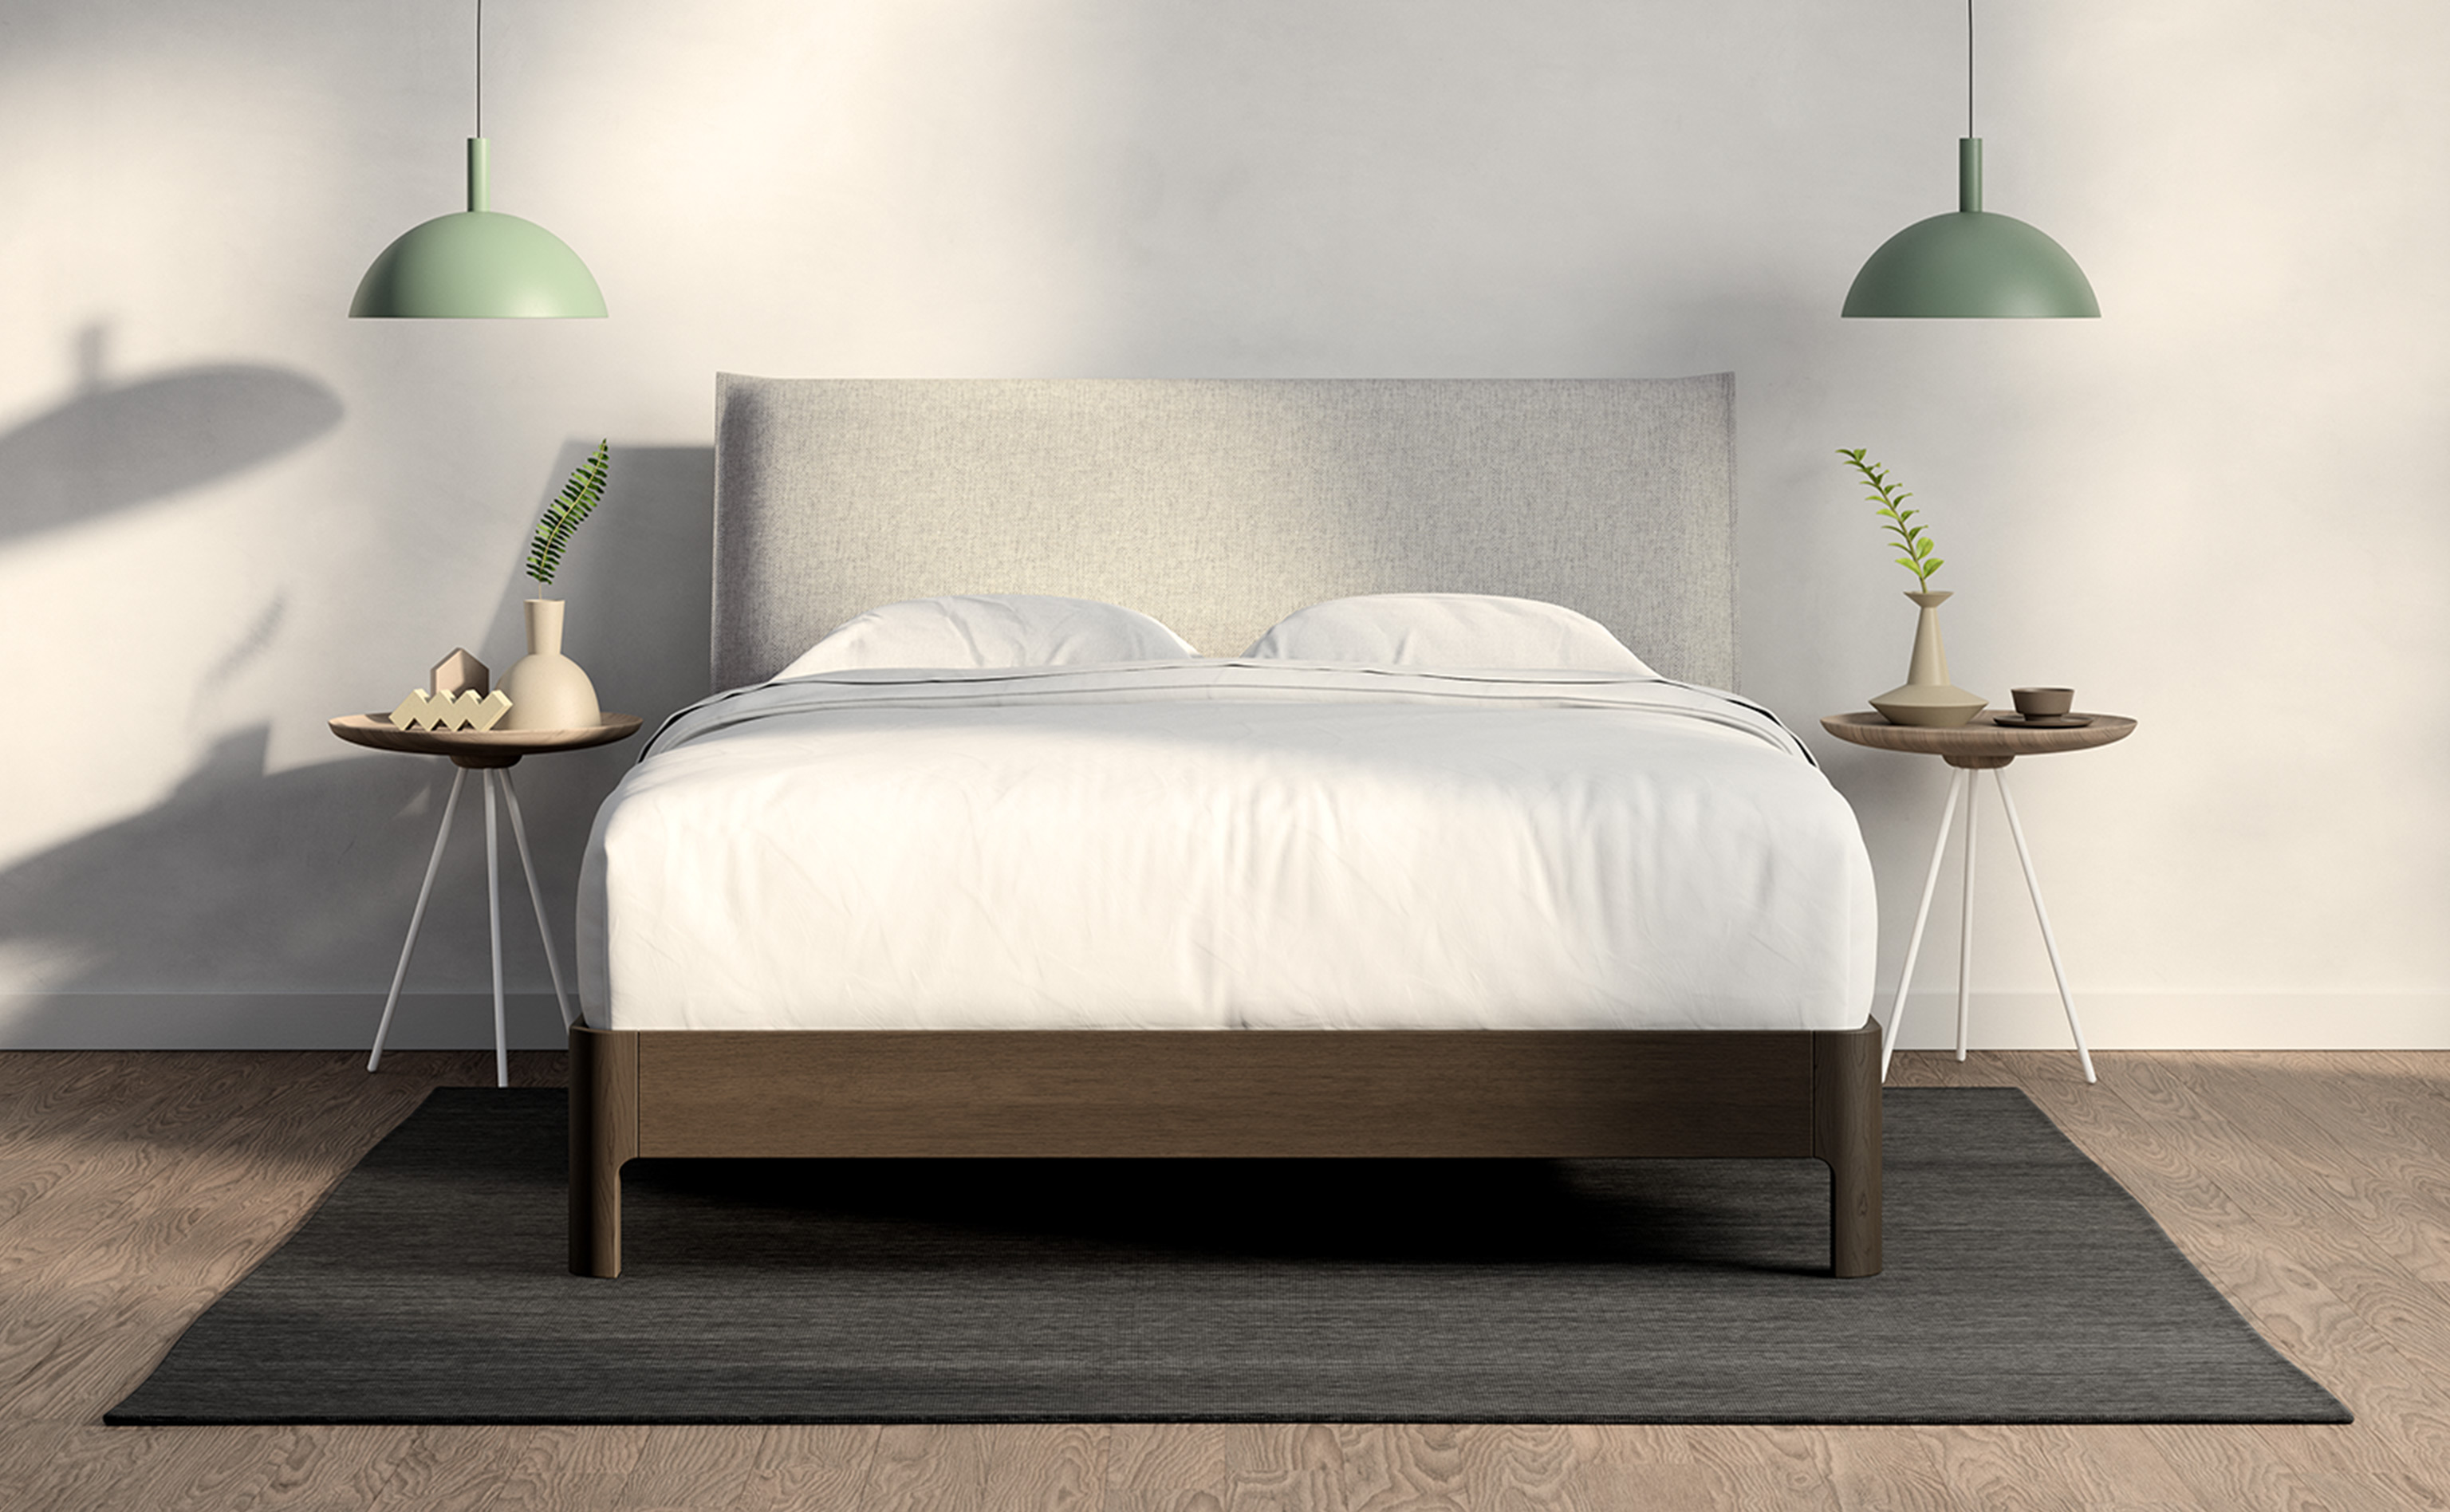 Casper Repose Wooden Bed Frame With, Light Brown Wood Headboard